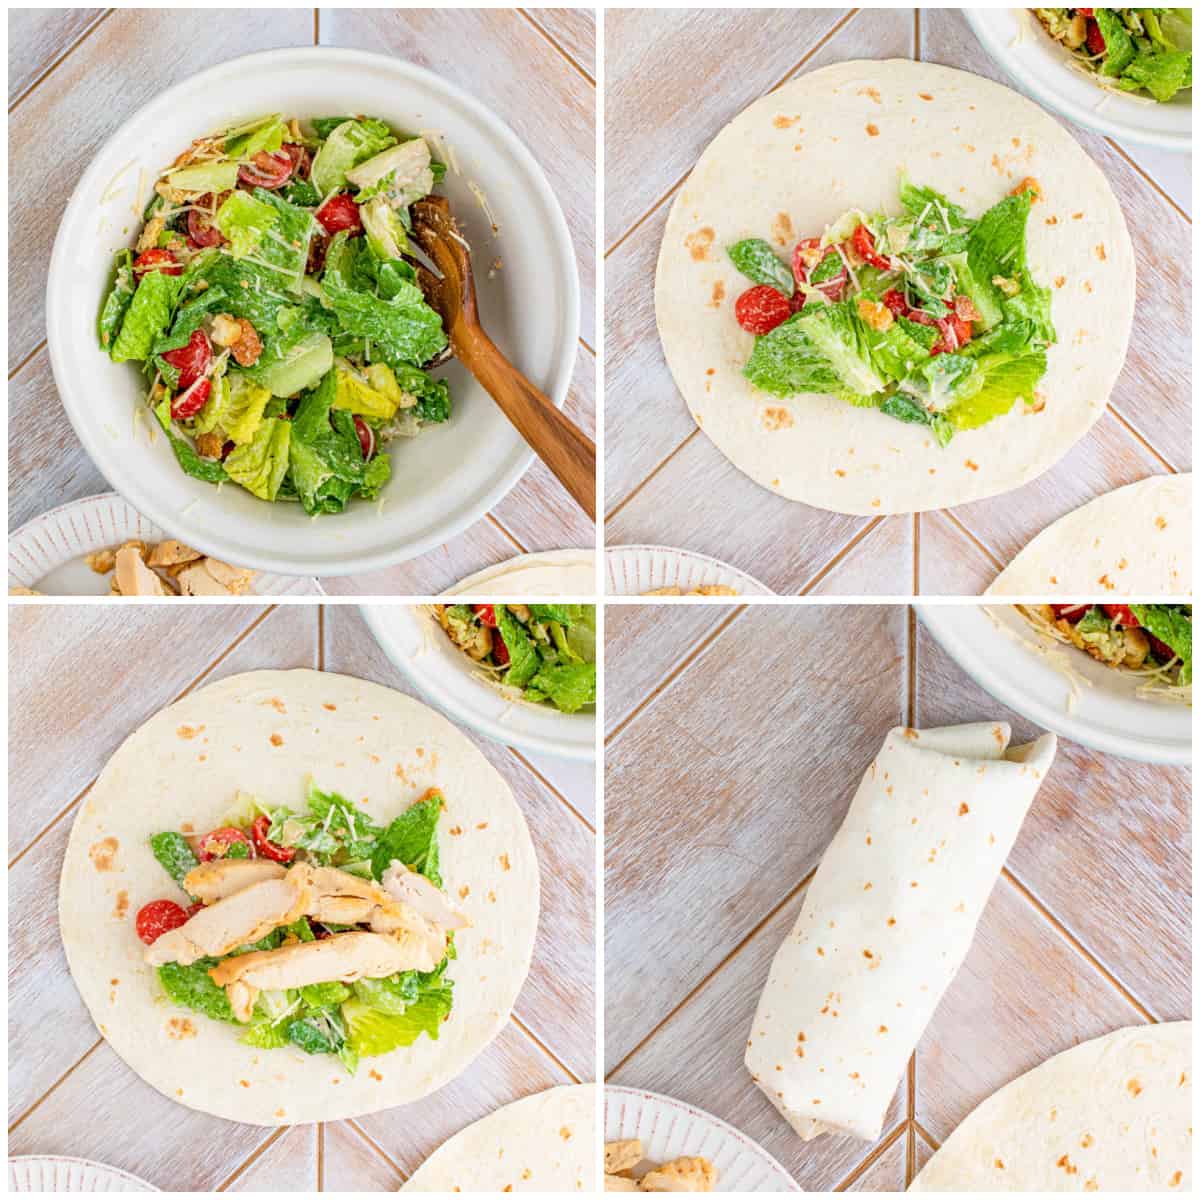 Step by step photos on how to make Chicken Caesar Wraps.